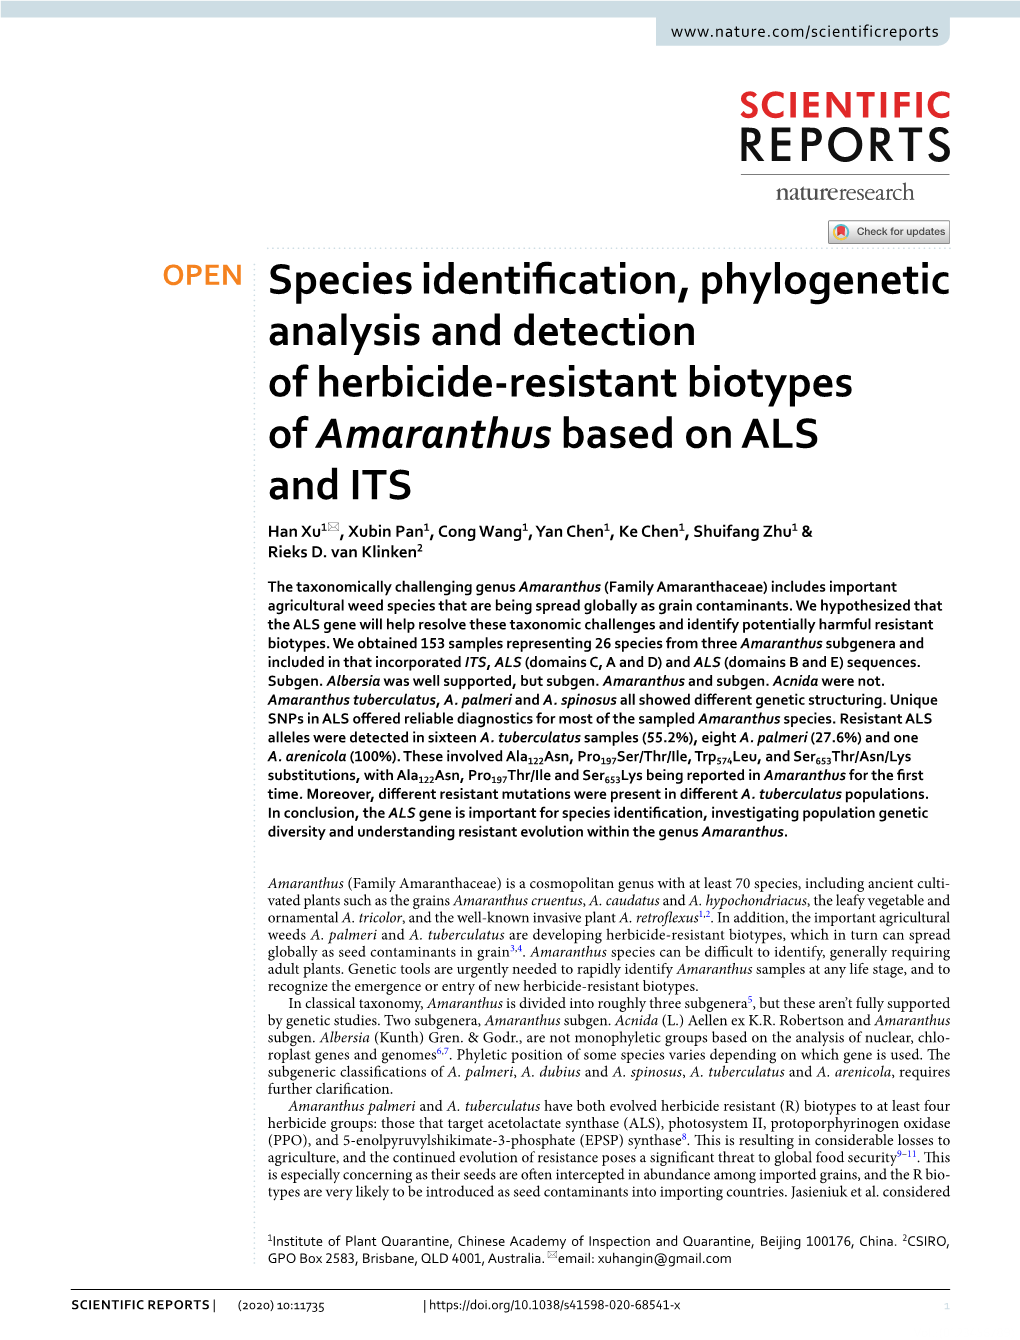 Species Identification, Phylogenetic Analysis and Detection of Herbicide